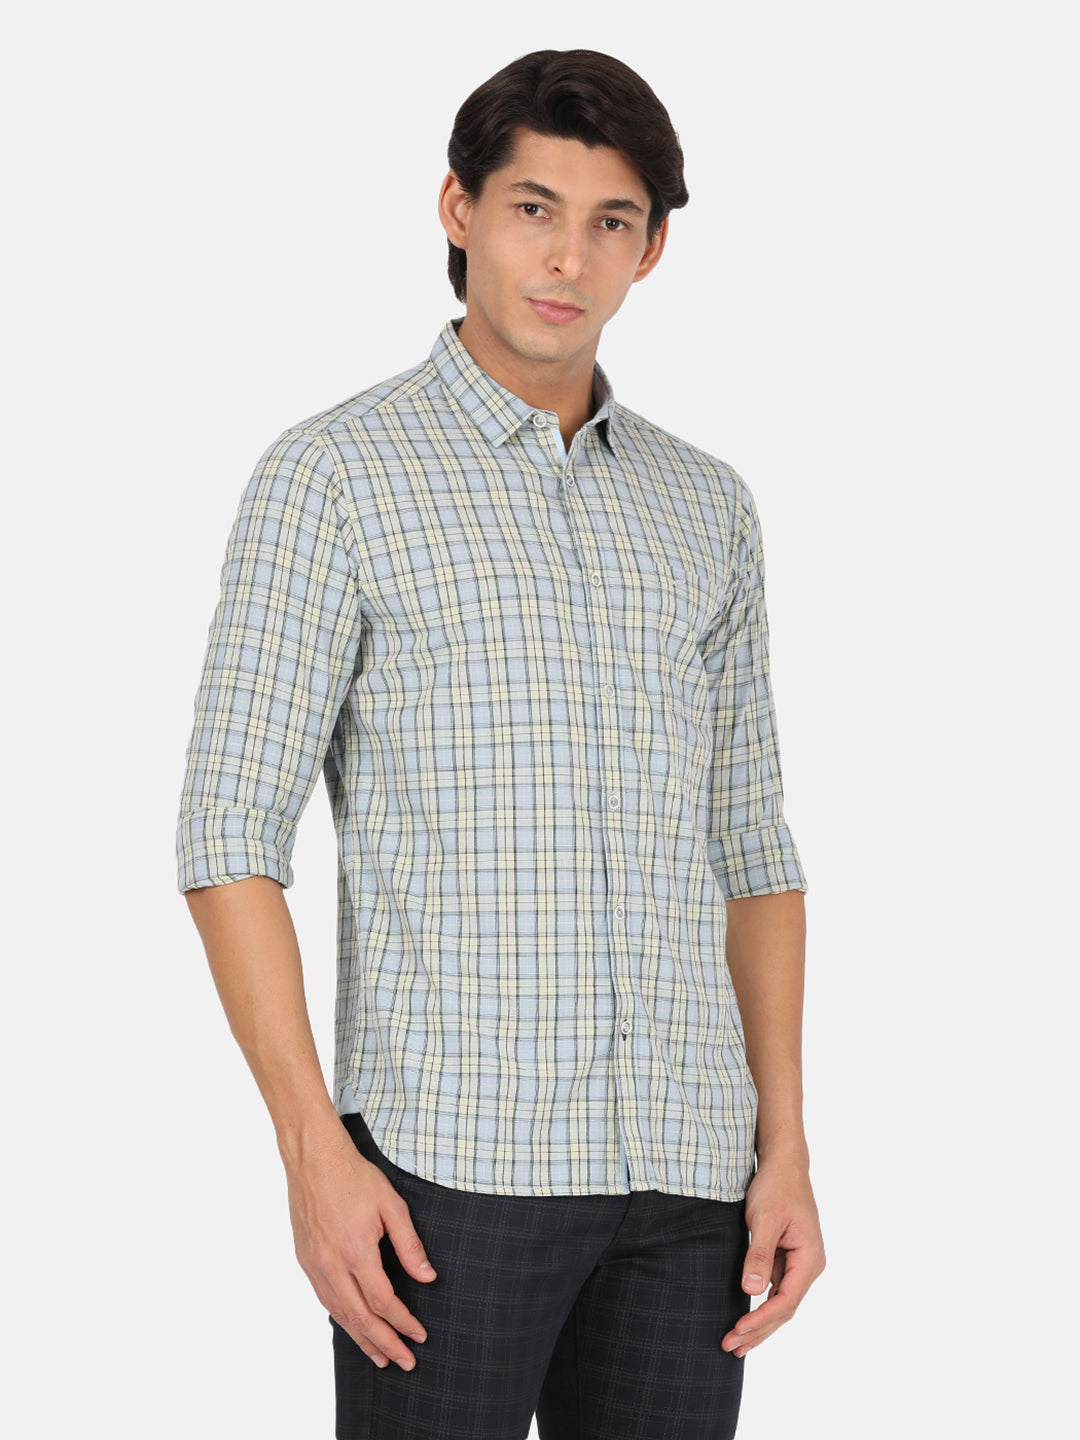 Casual Full Sleeve Comfort Fit Checks Light Blue with Collar Shirt for Men